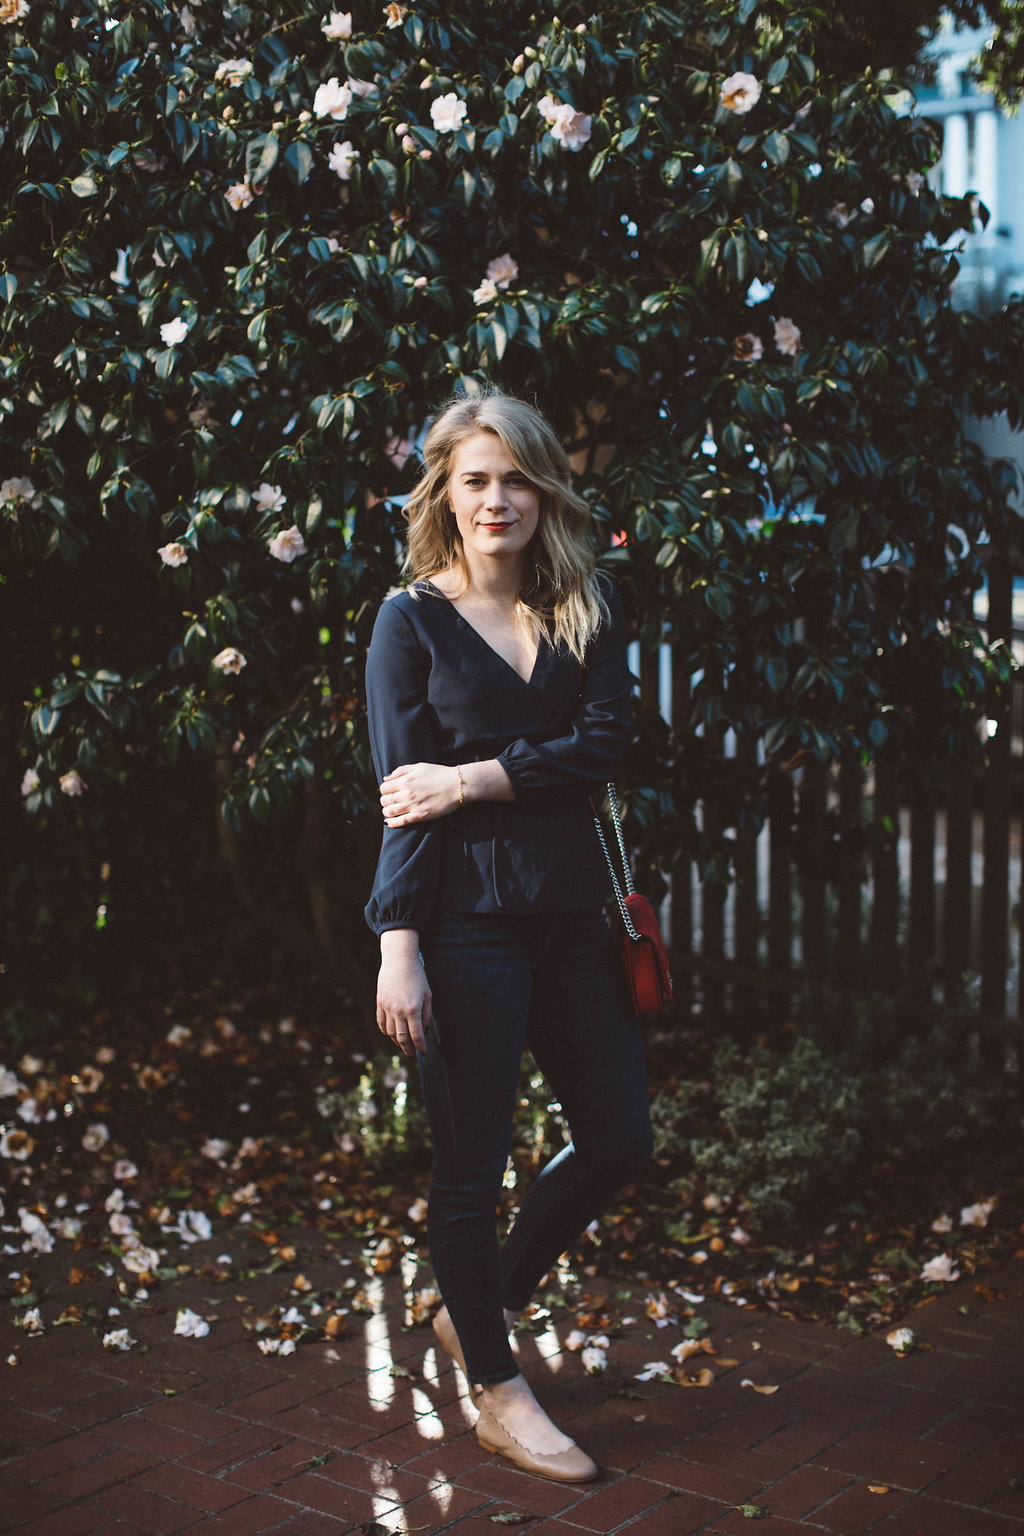 A Classic Look for the Office // J. Crew Wrap Top with Dark Madewell Denim and Scalloped Ballet Flats